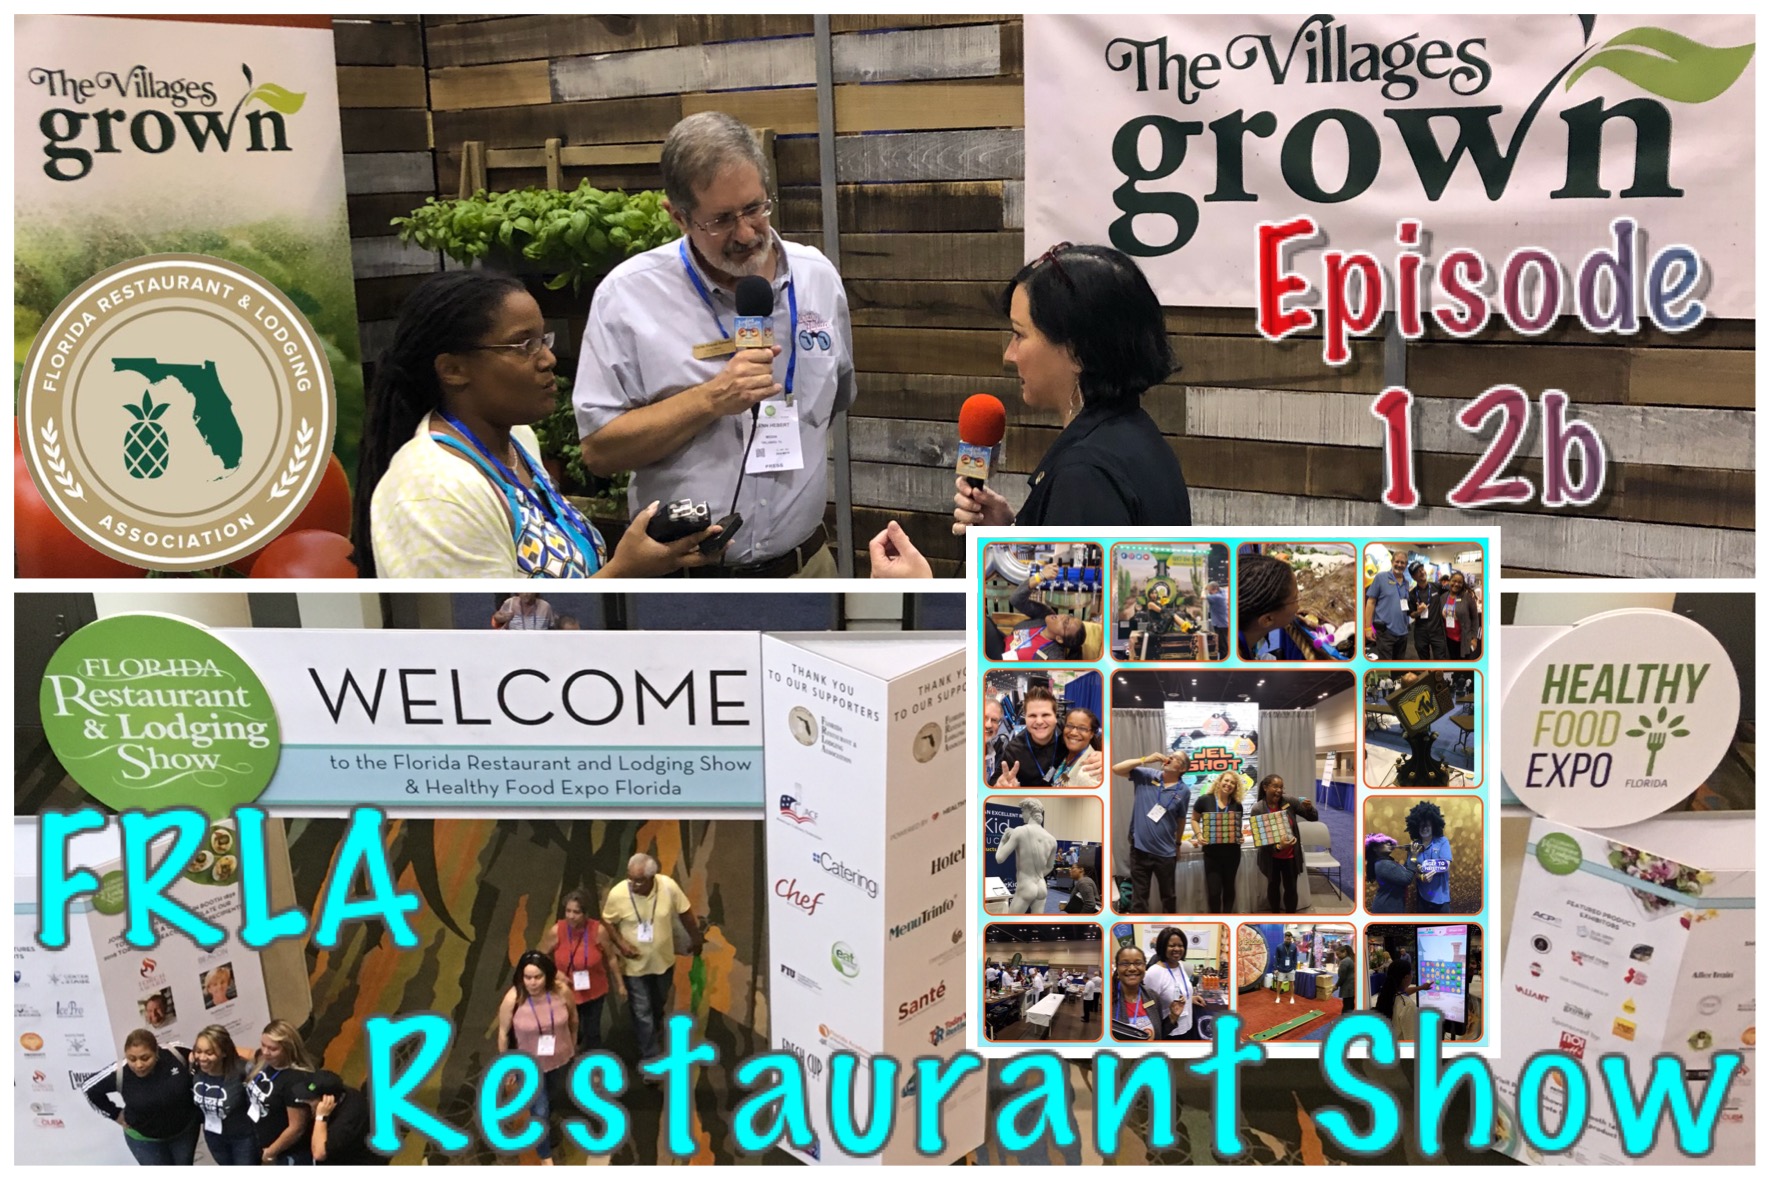 Finding Florida Podcast: FRLA, Hilton Grand Vacations, Mix on Wheels, The Villages Grown, Perky’s Pizza, Oumph, The American Culinary Federation, Harmonies Brew, The Pizza Girls, Jel Shots